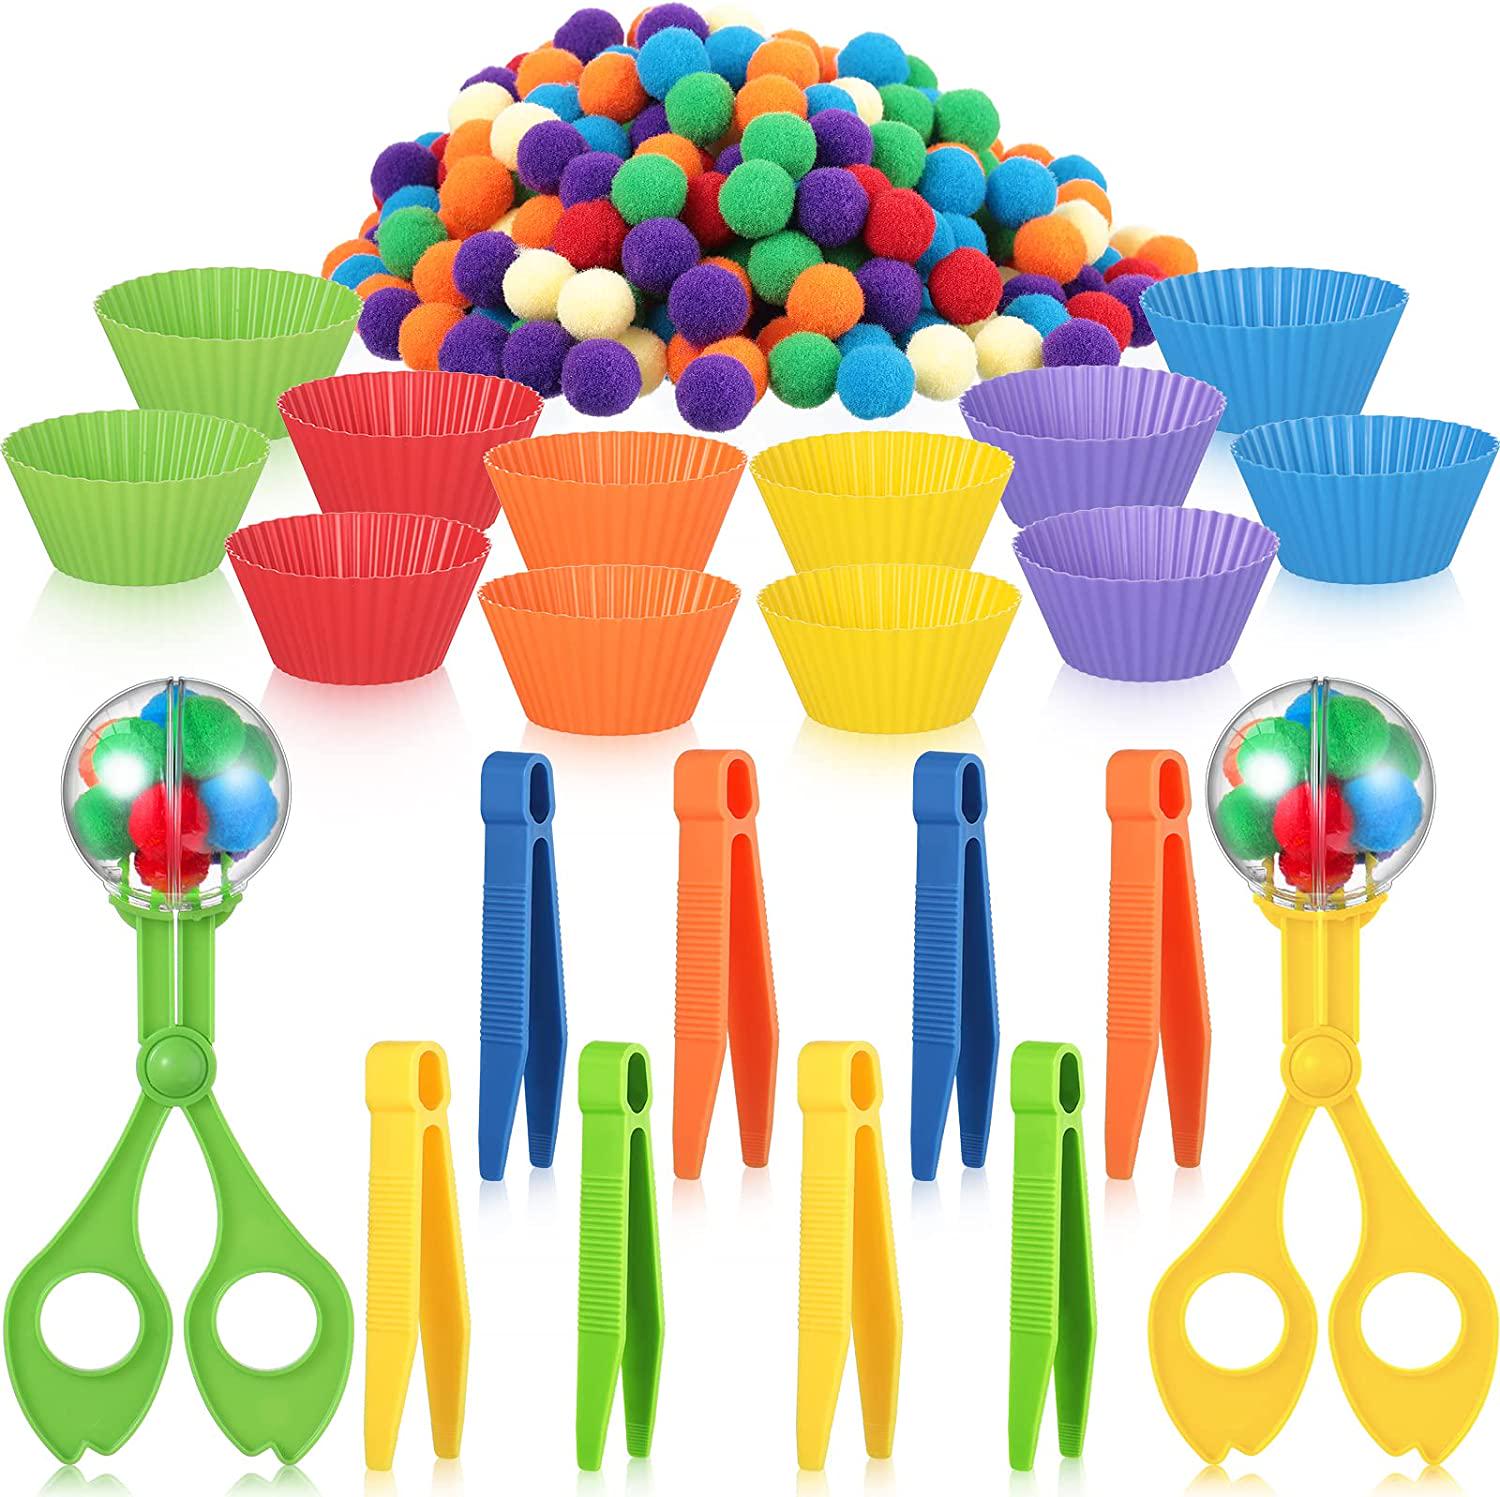 Zhanmai, Fine Motor Skills Handy Scooper Set Includes 6 Sorting Bowls, 4 Tweezers, 2 Scissors Clips, 120 Plush Balls for Early Education and Sorting Counting Training Development for Kids